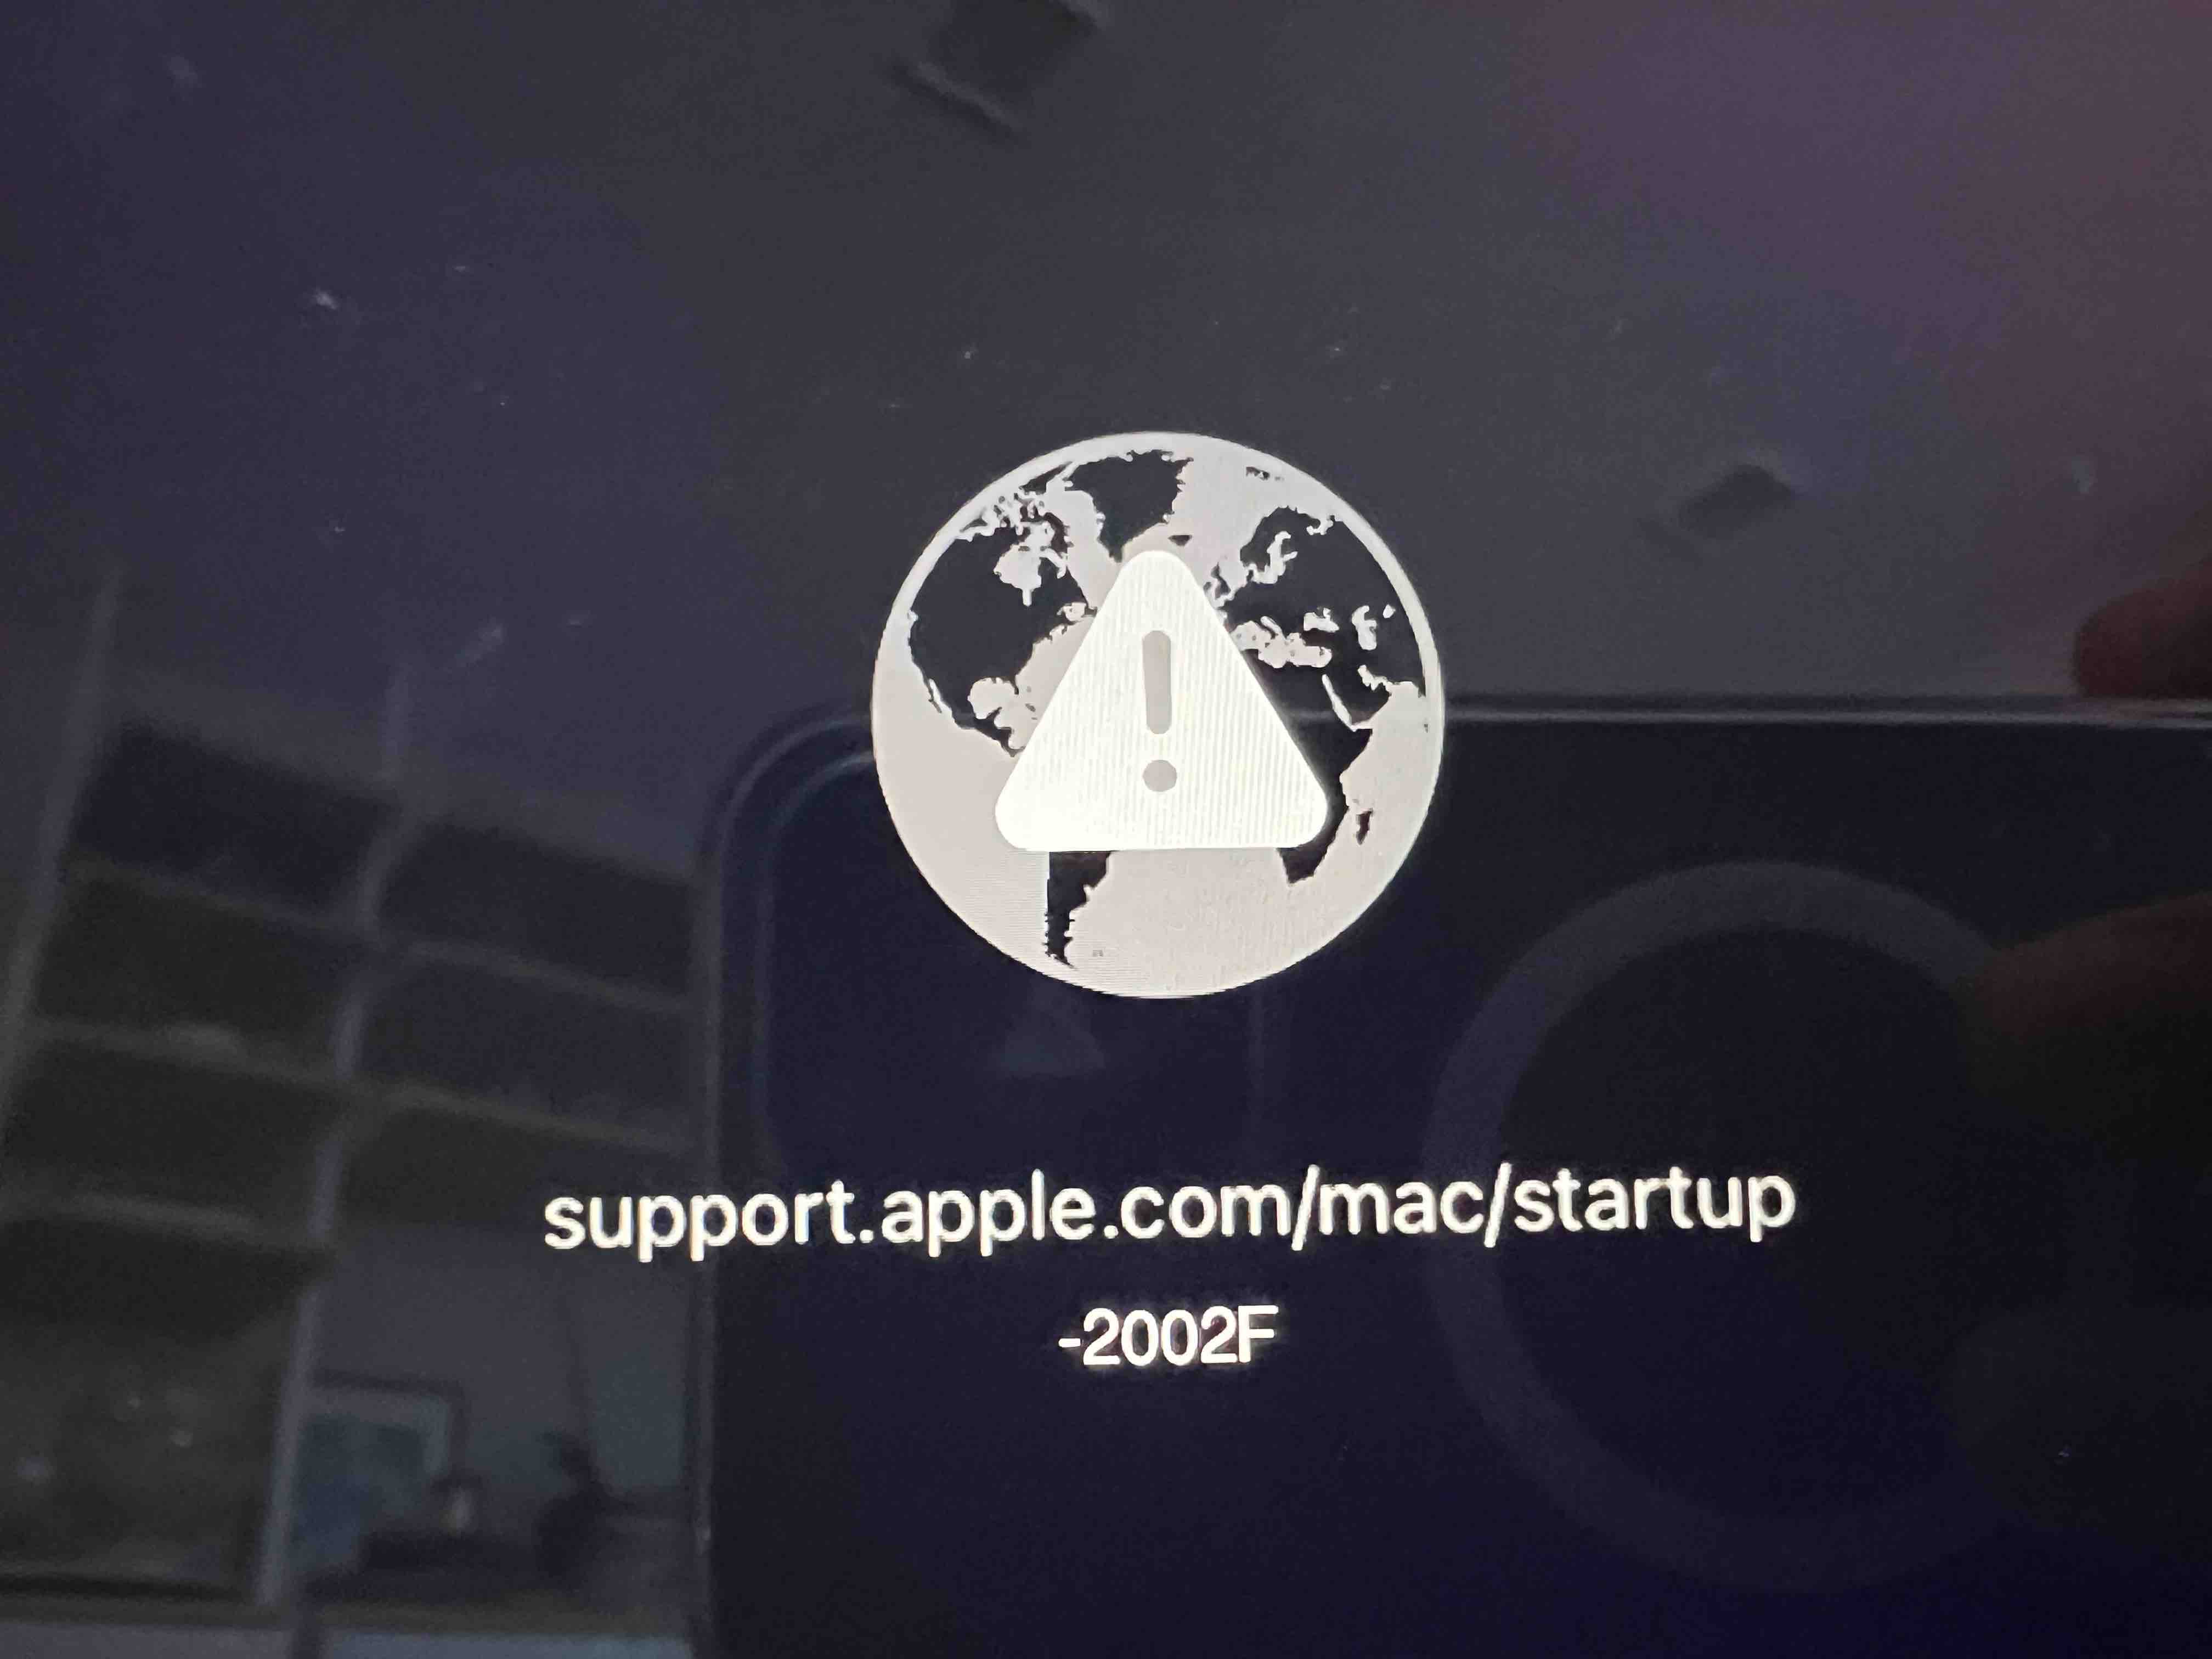 How to fix support apple.com/mac/startup 